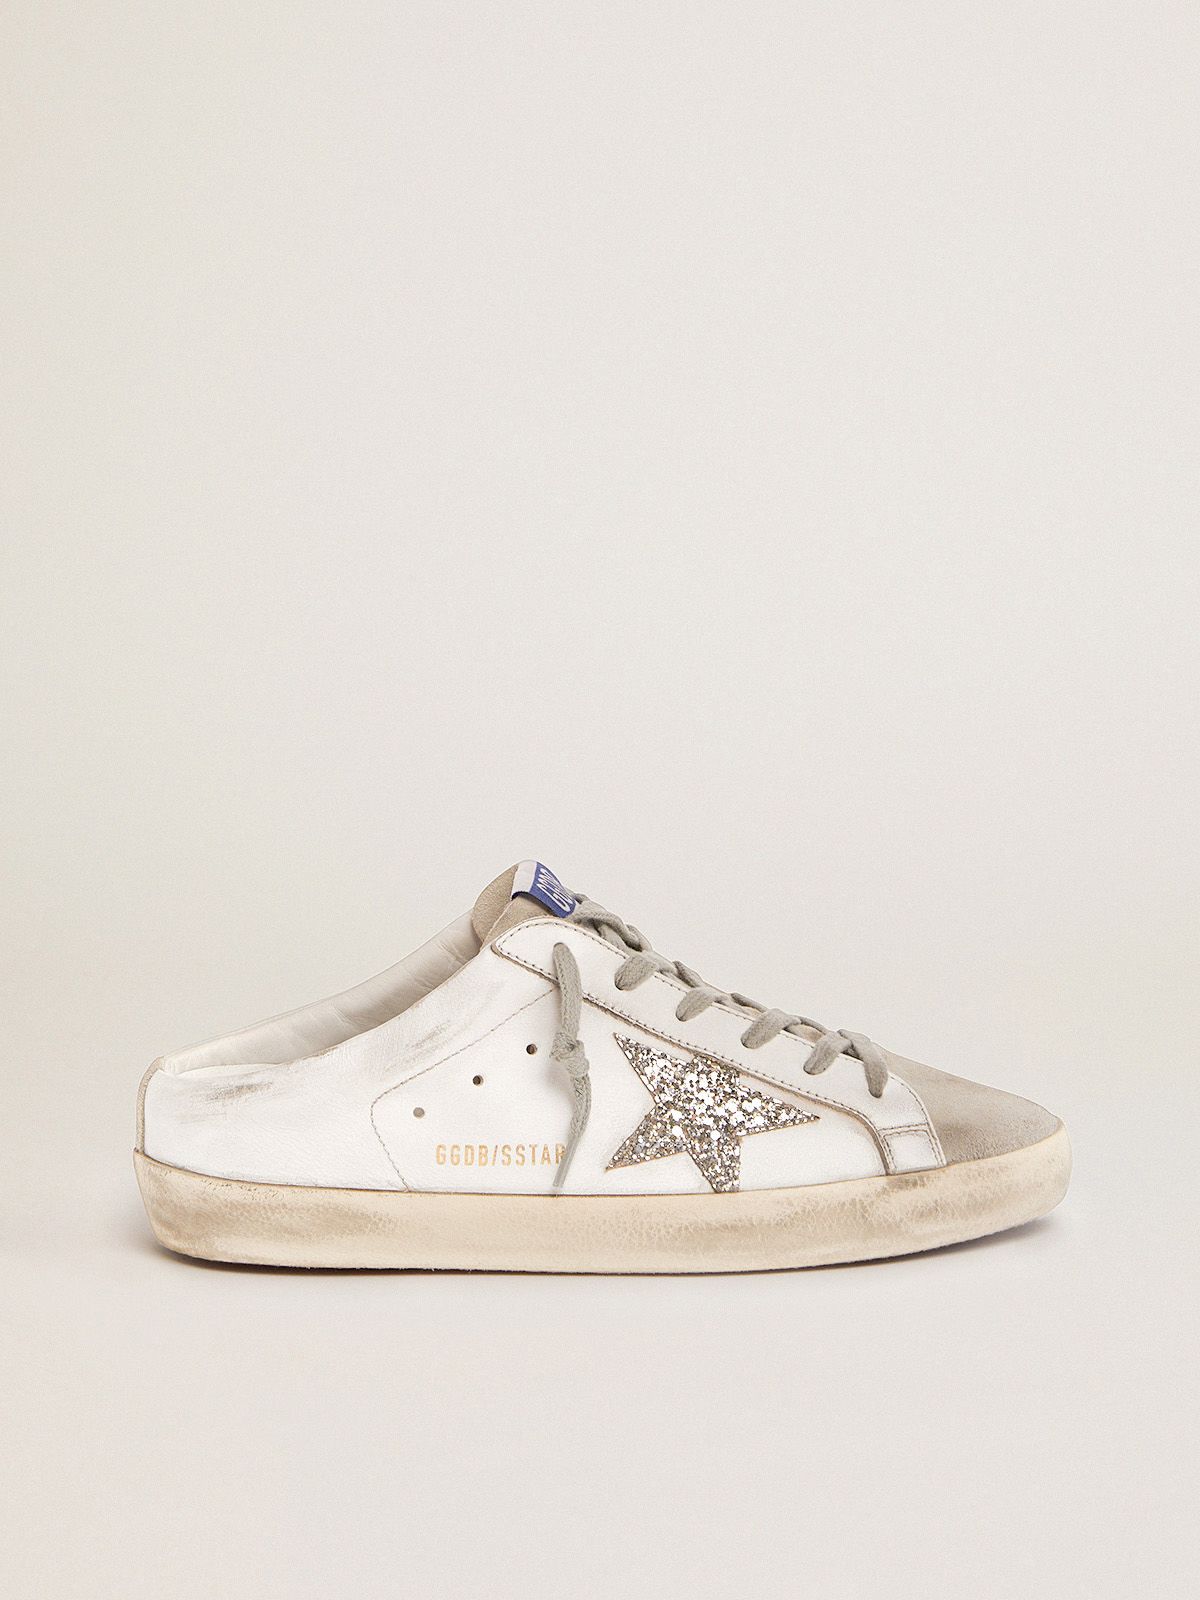 golden goose star Super-Star Sabots leather glitter silver suede and gray in white with